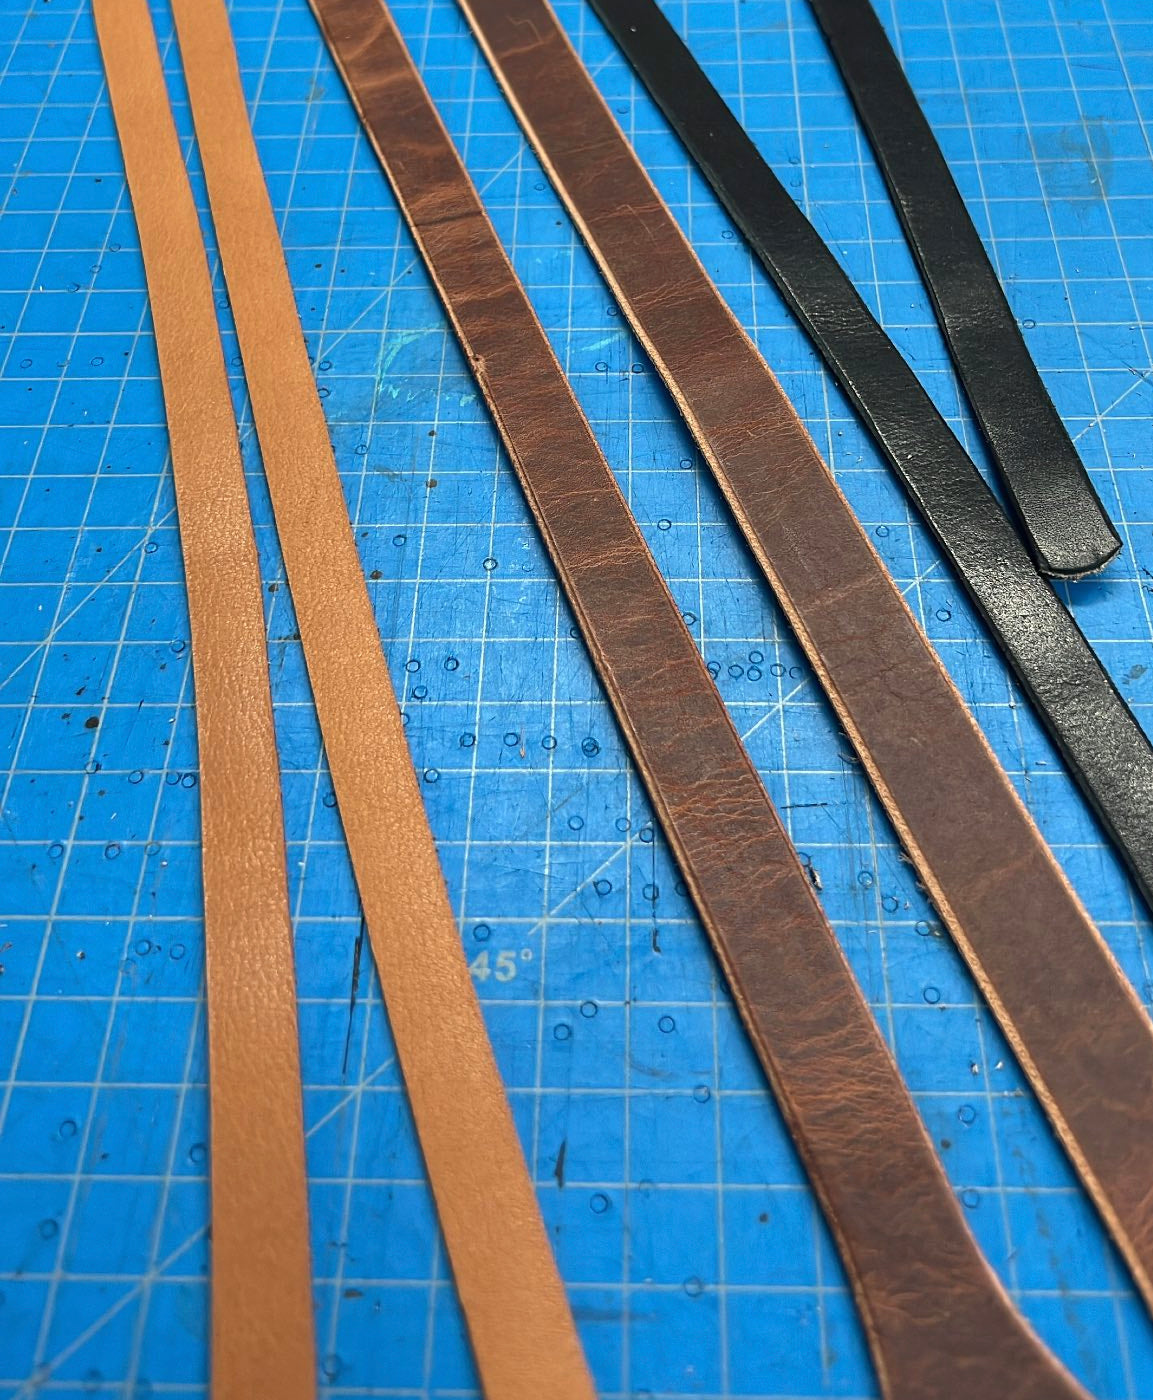 Leather Strips - For Strap Making